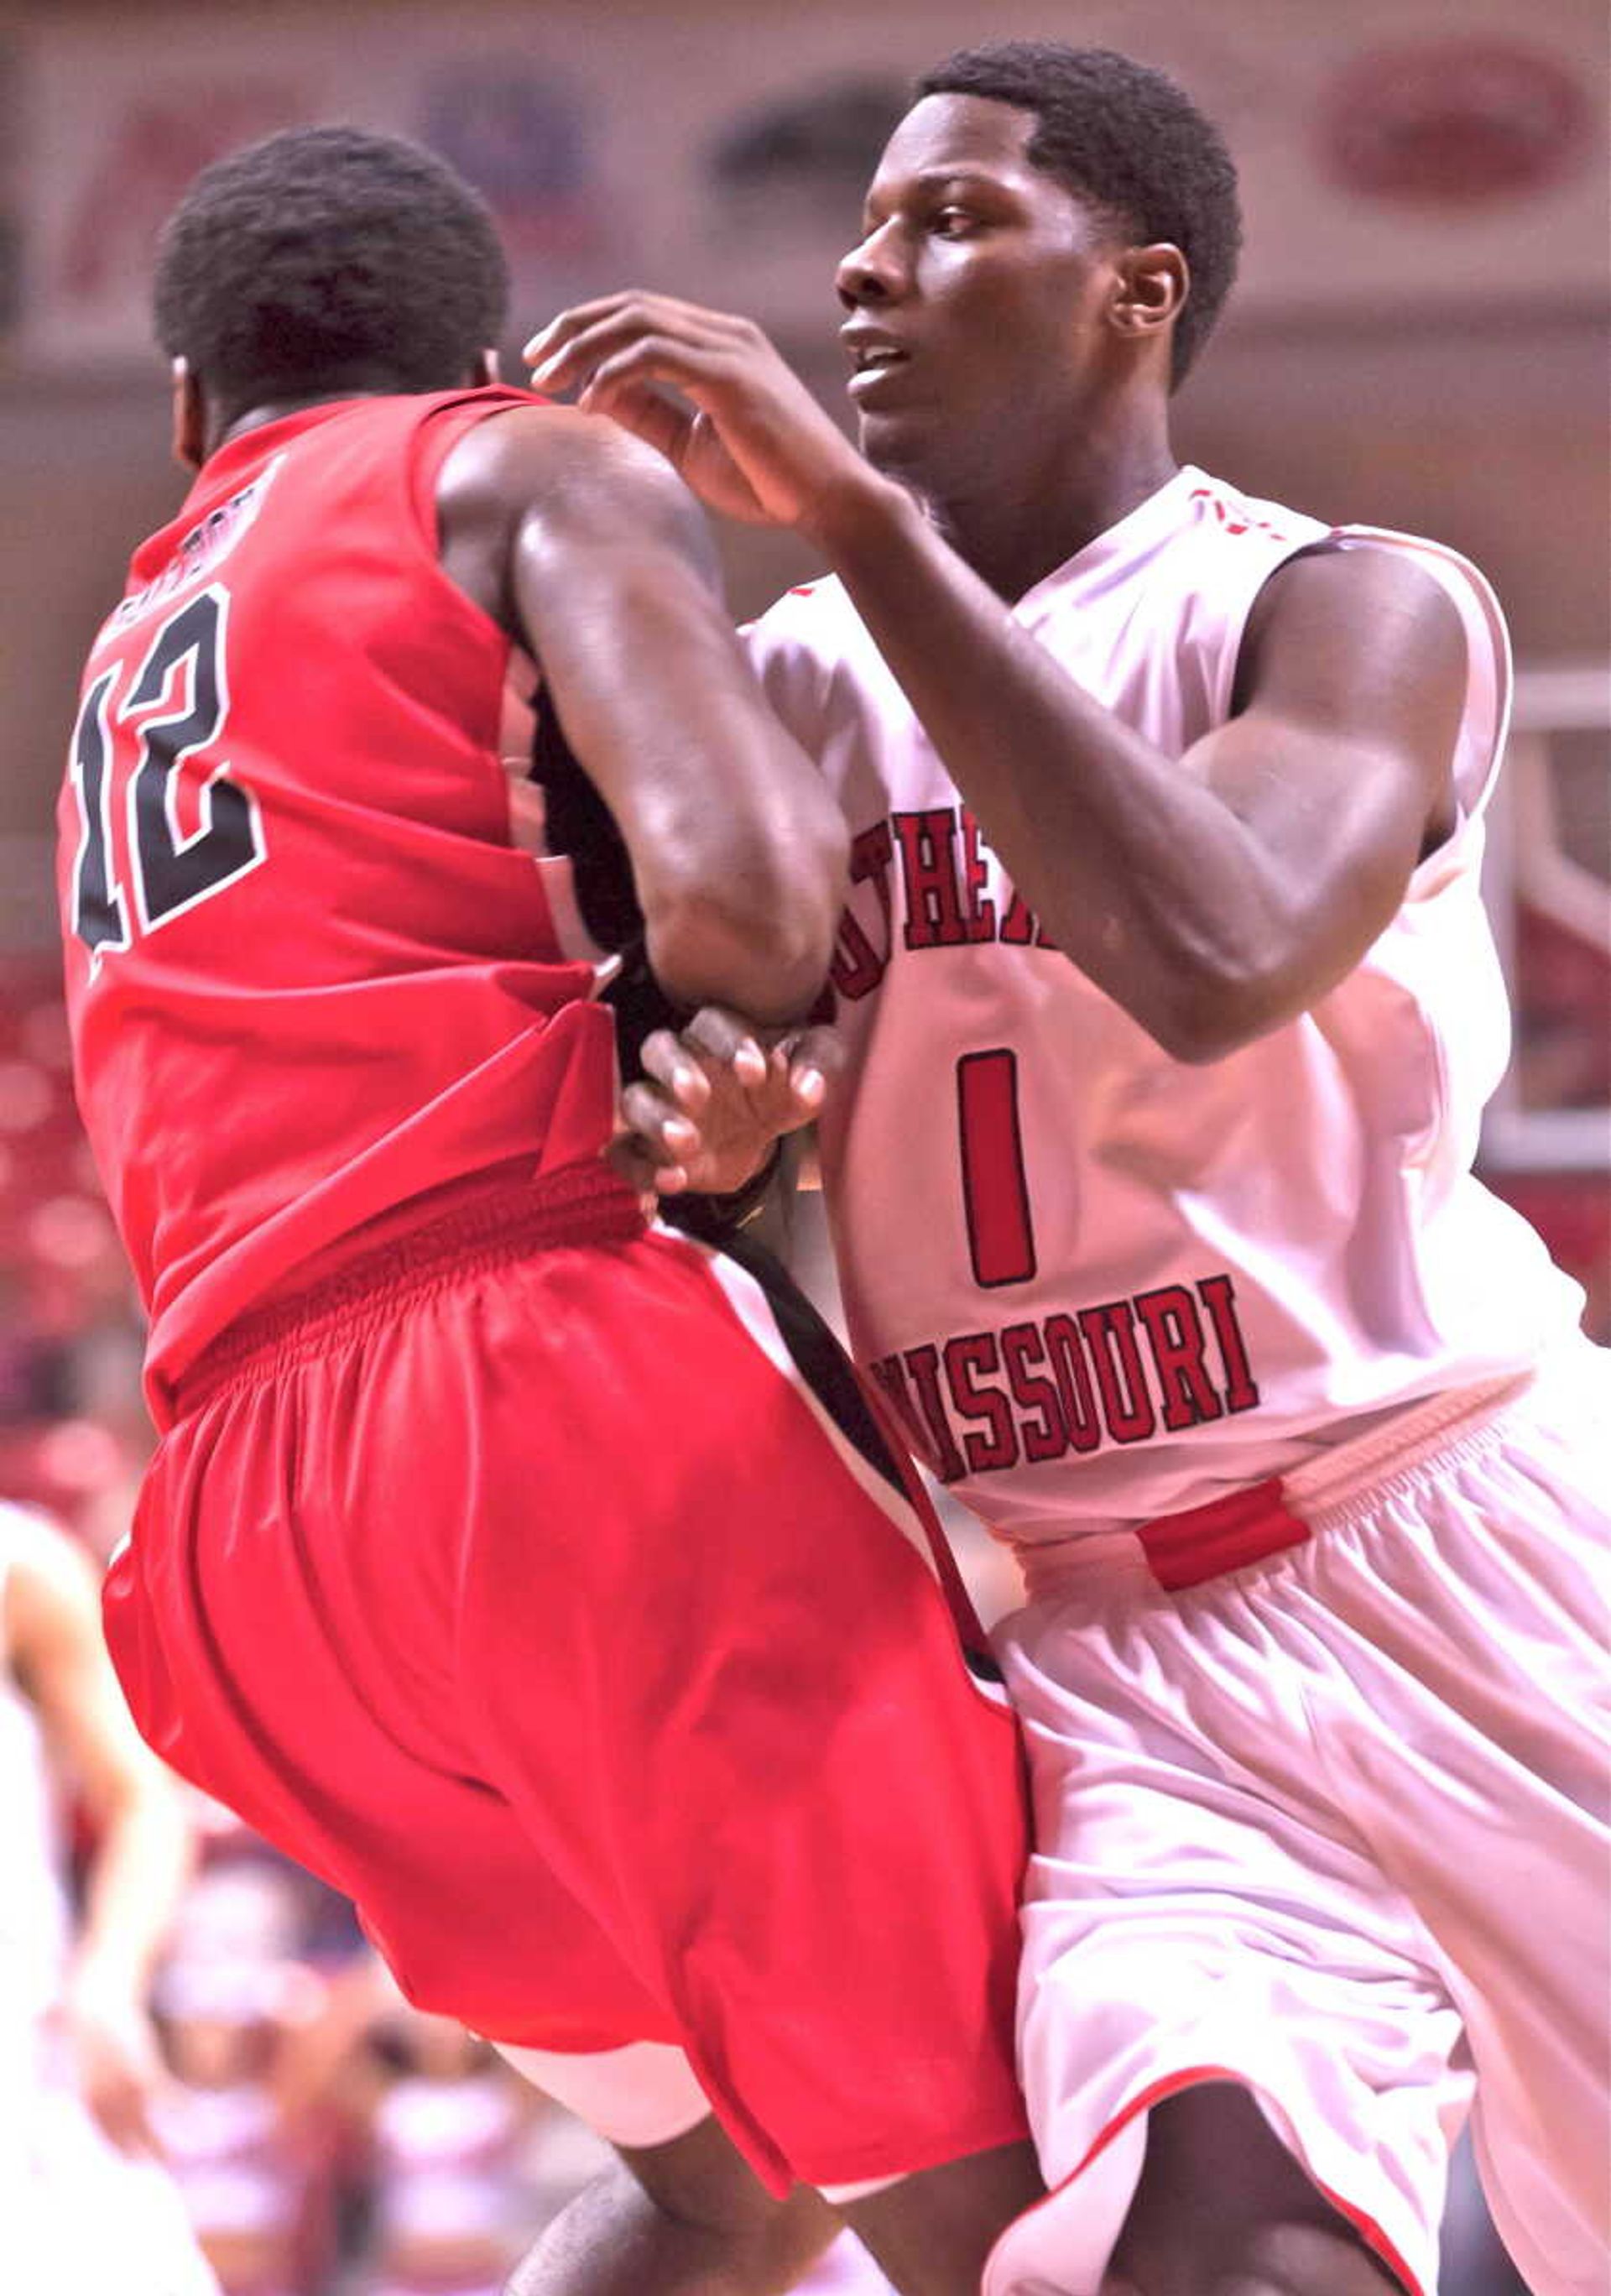 Southeast forward Nino Johnson tries to get past a Ball State player during a game Saturday at the Show Me Center. Photo by Alyssa Brewer